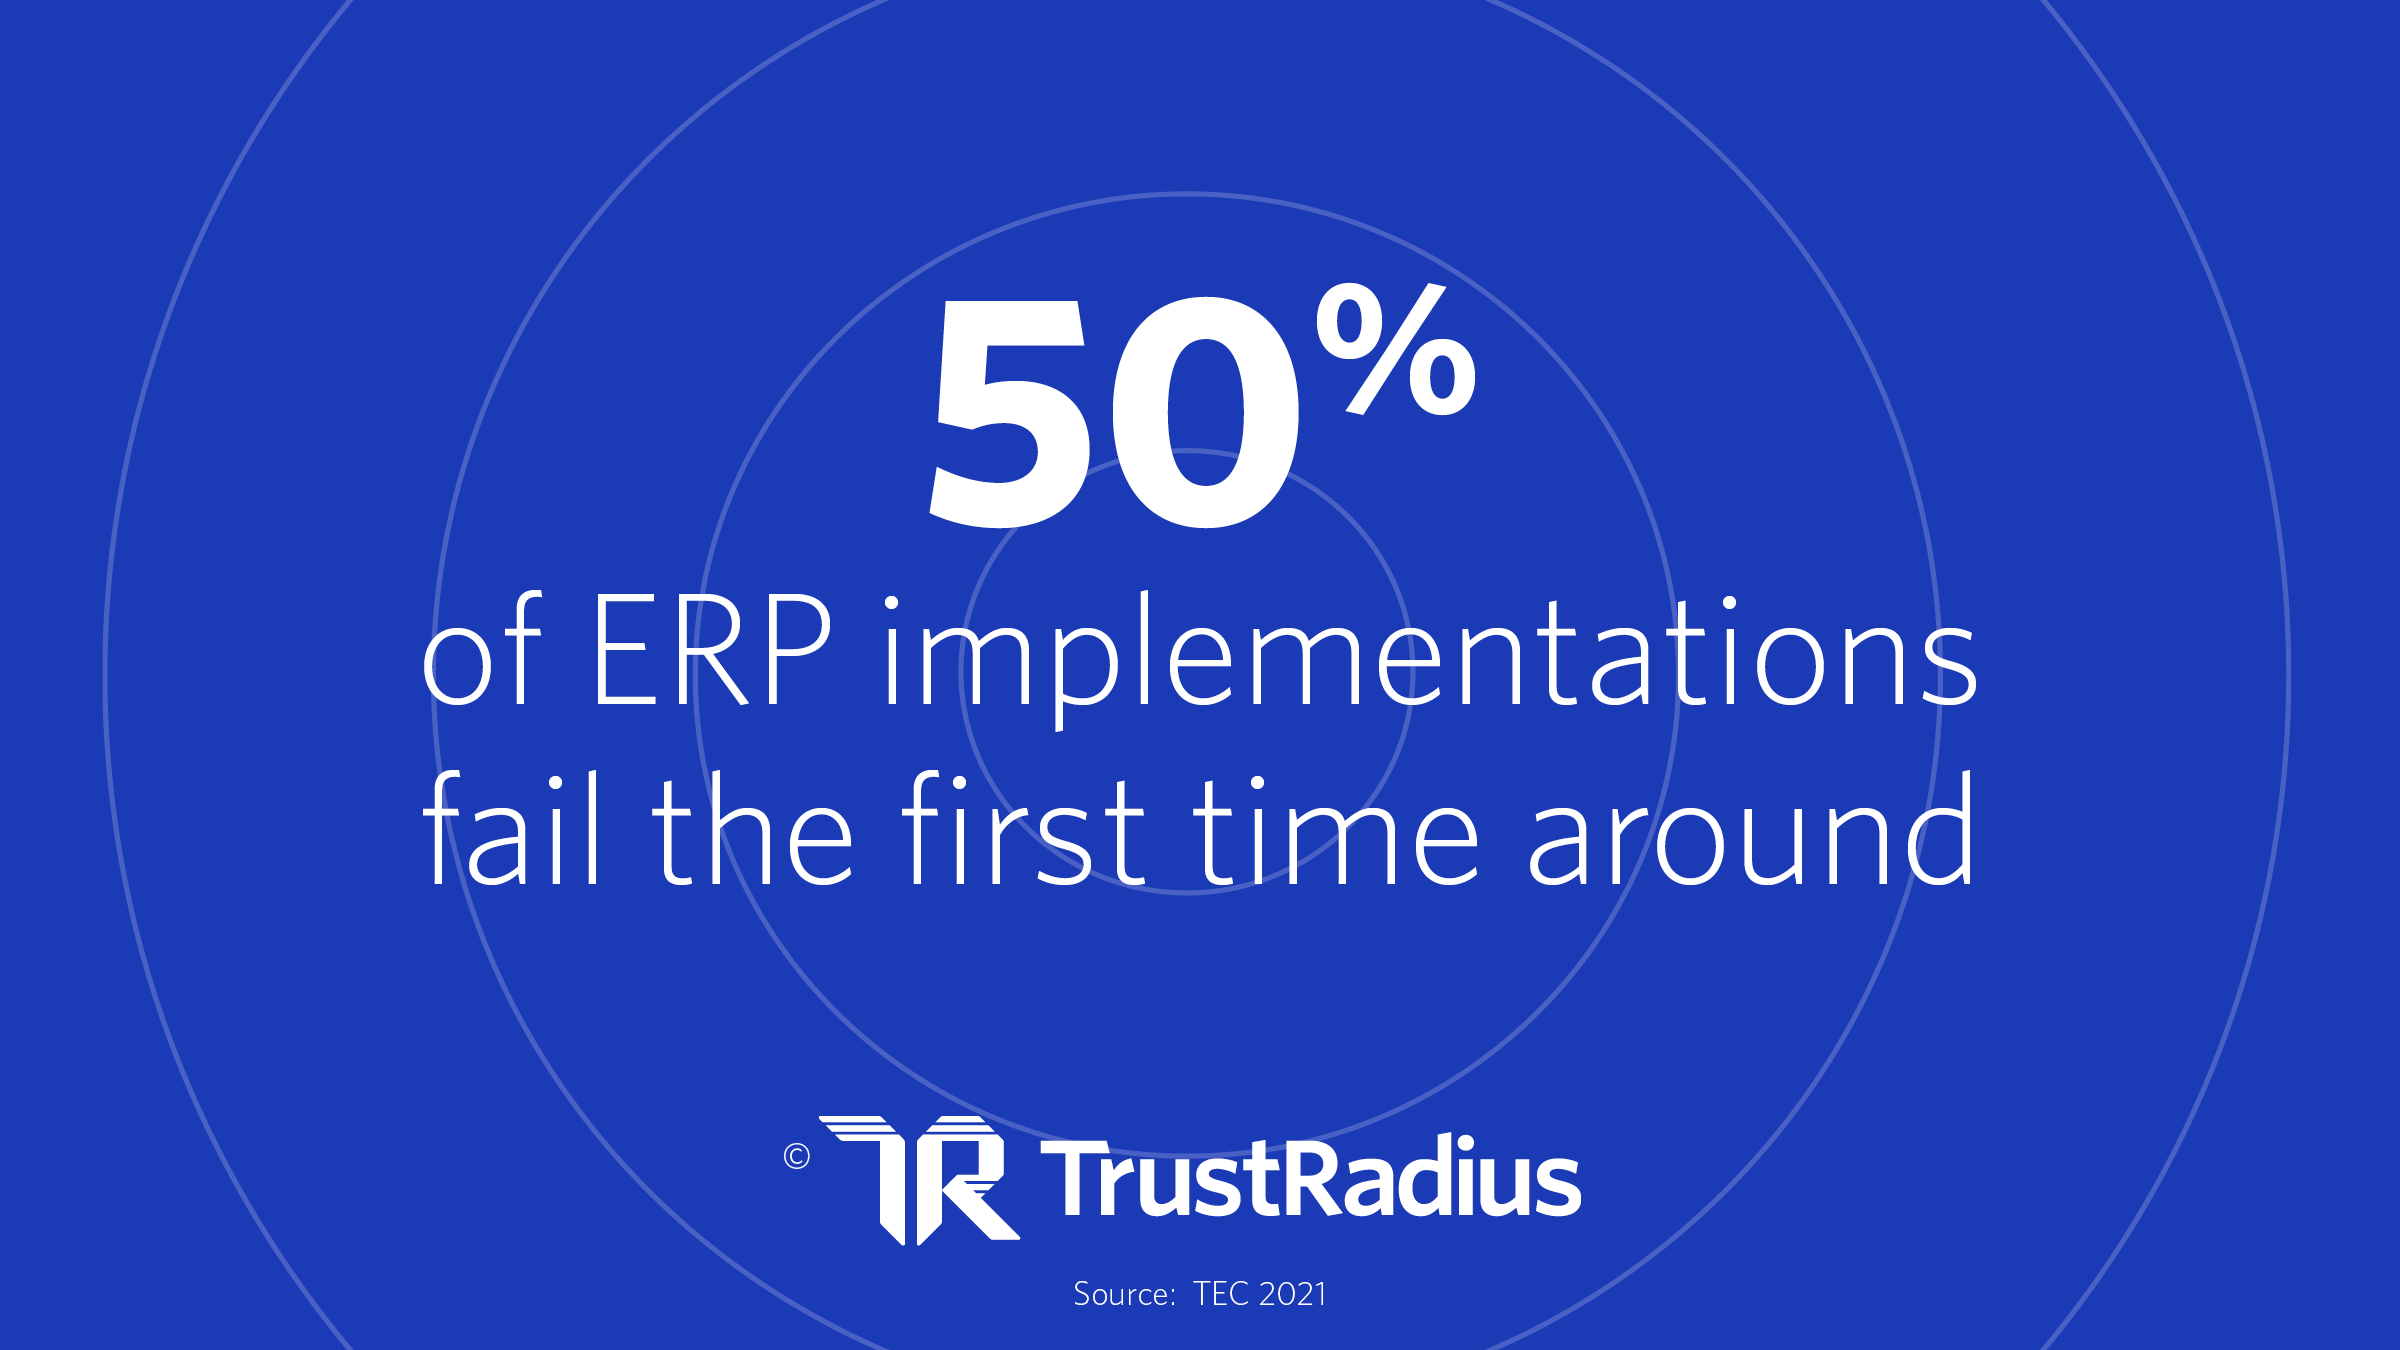 50% of ERP implementations fail the first time around